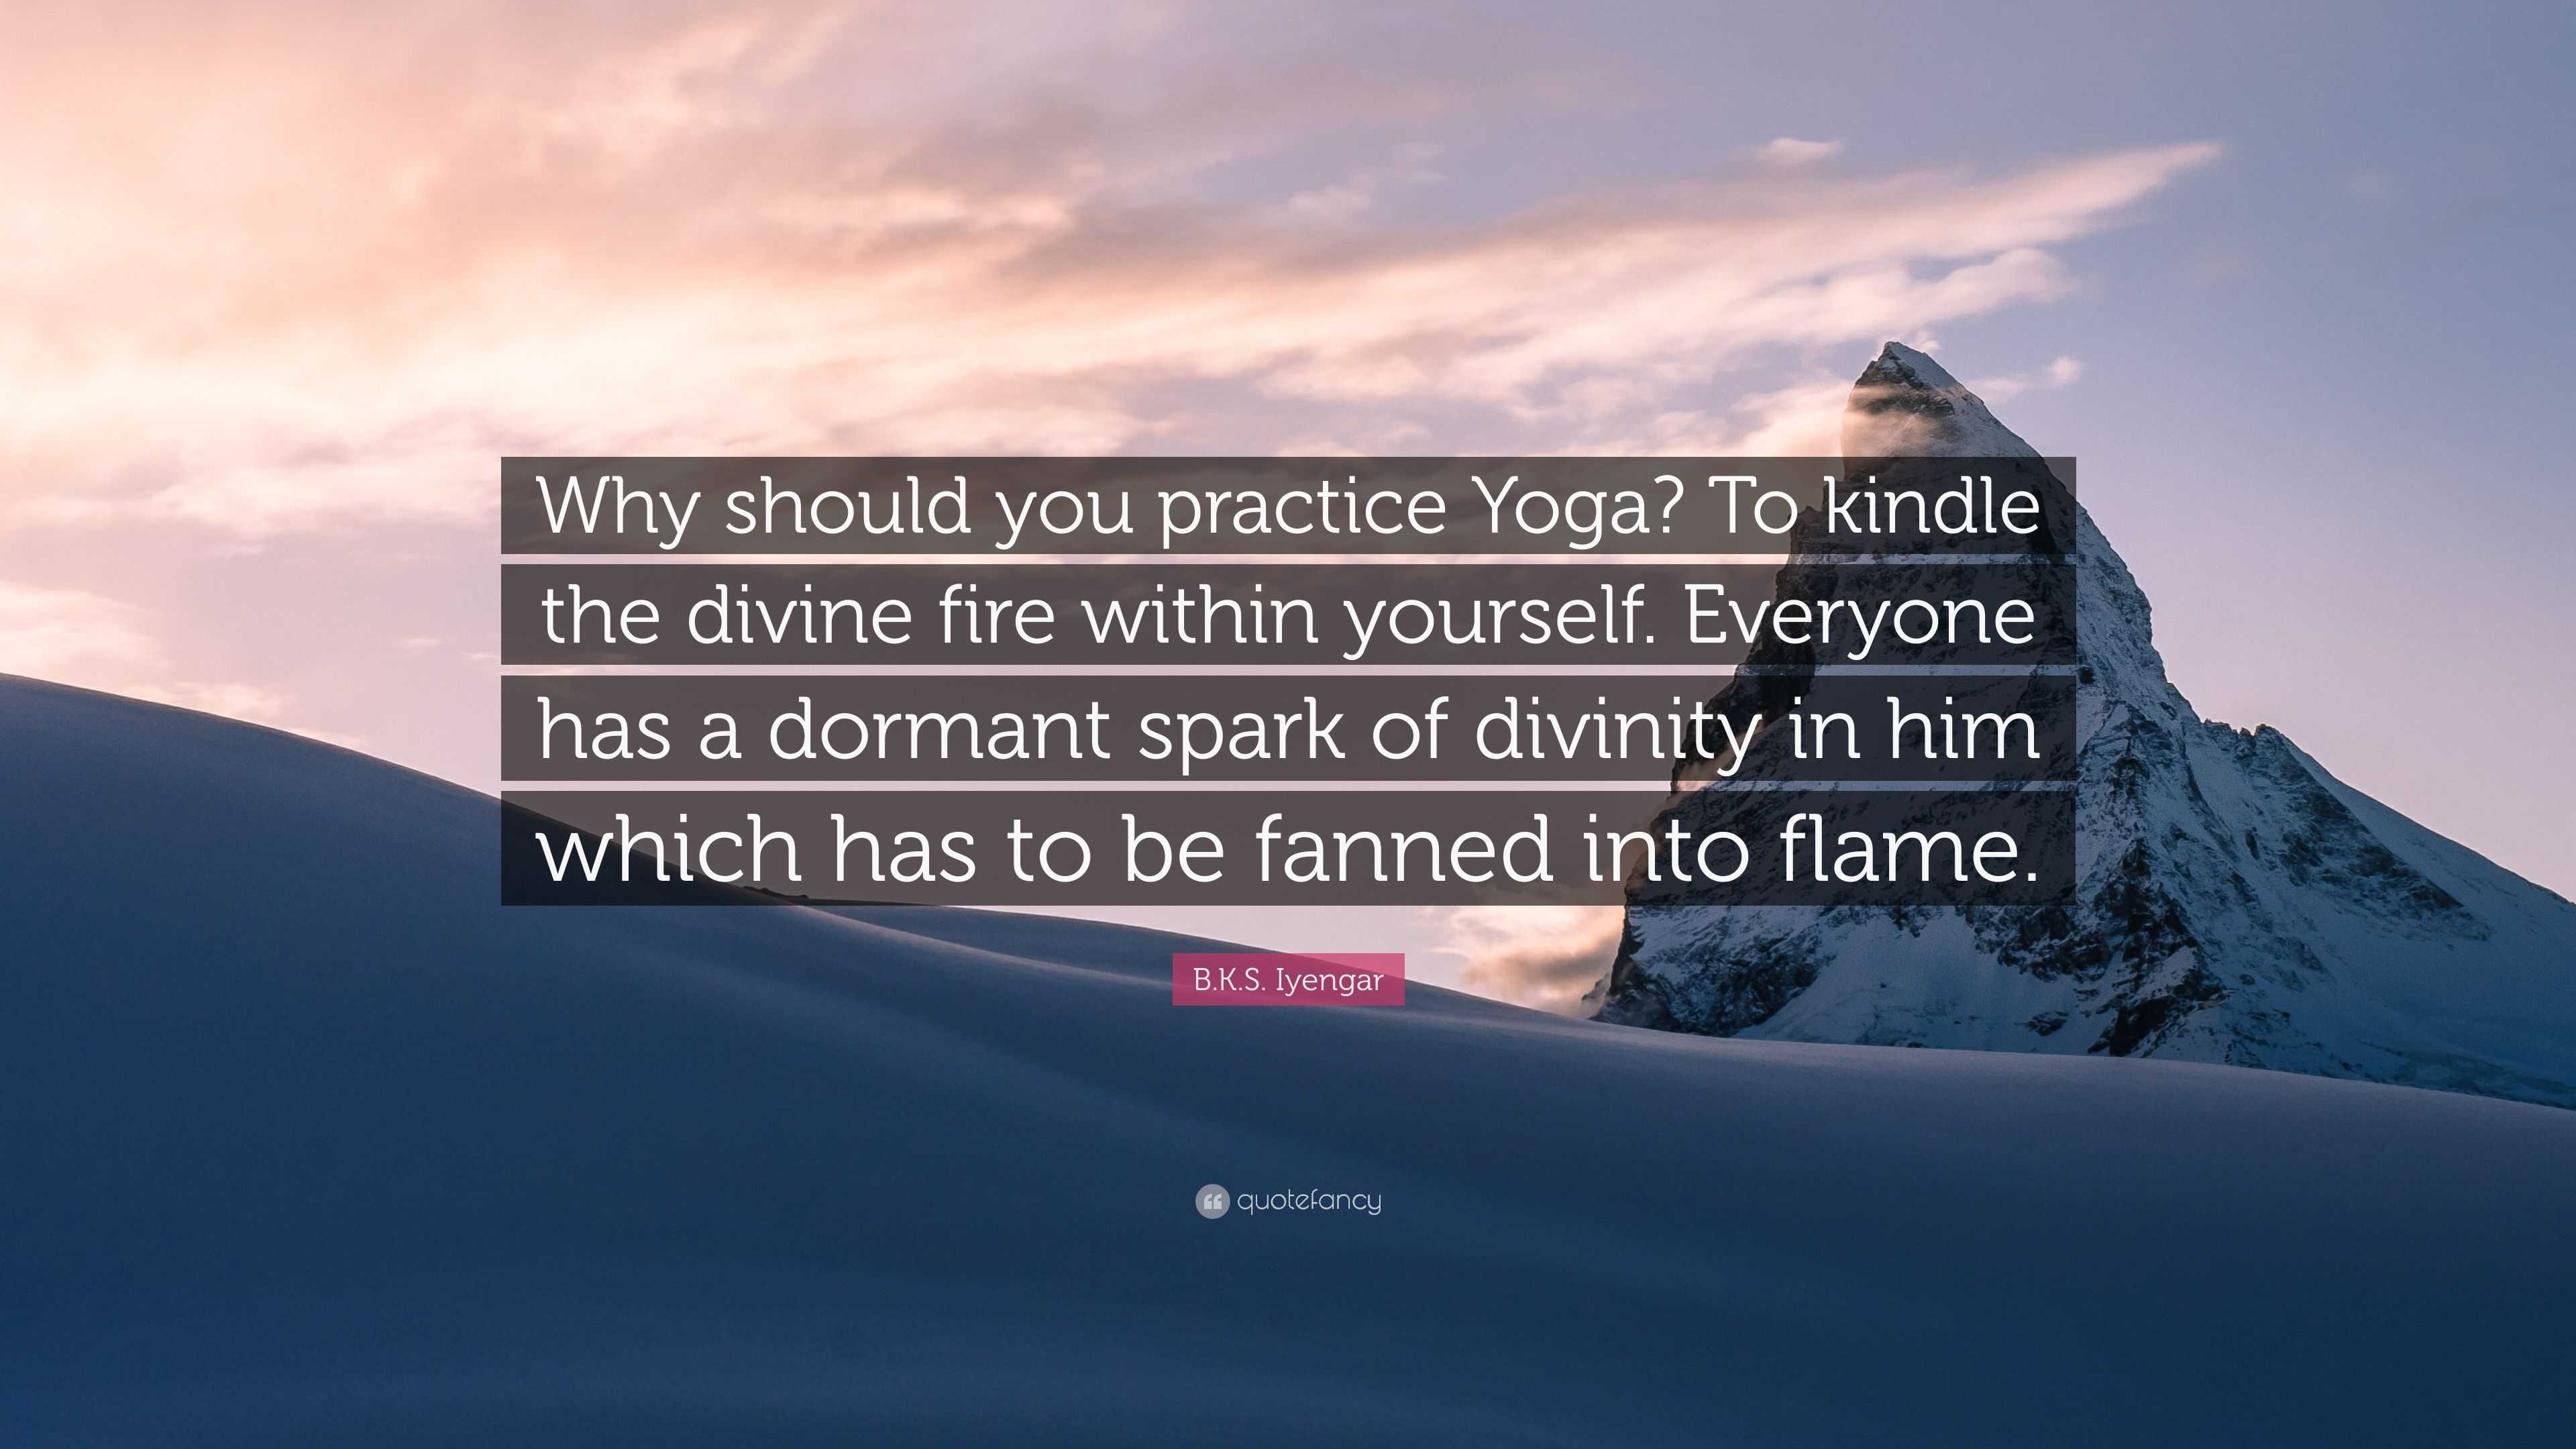 B.K.S. Iyengar Quote: “Why should you practice Yoga? To kindle the